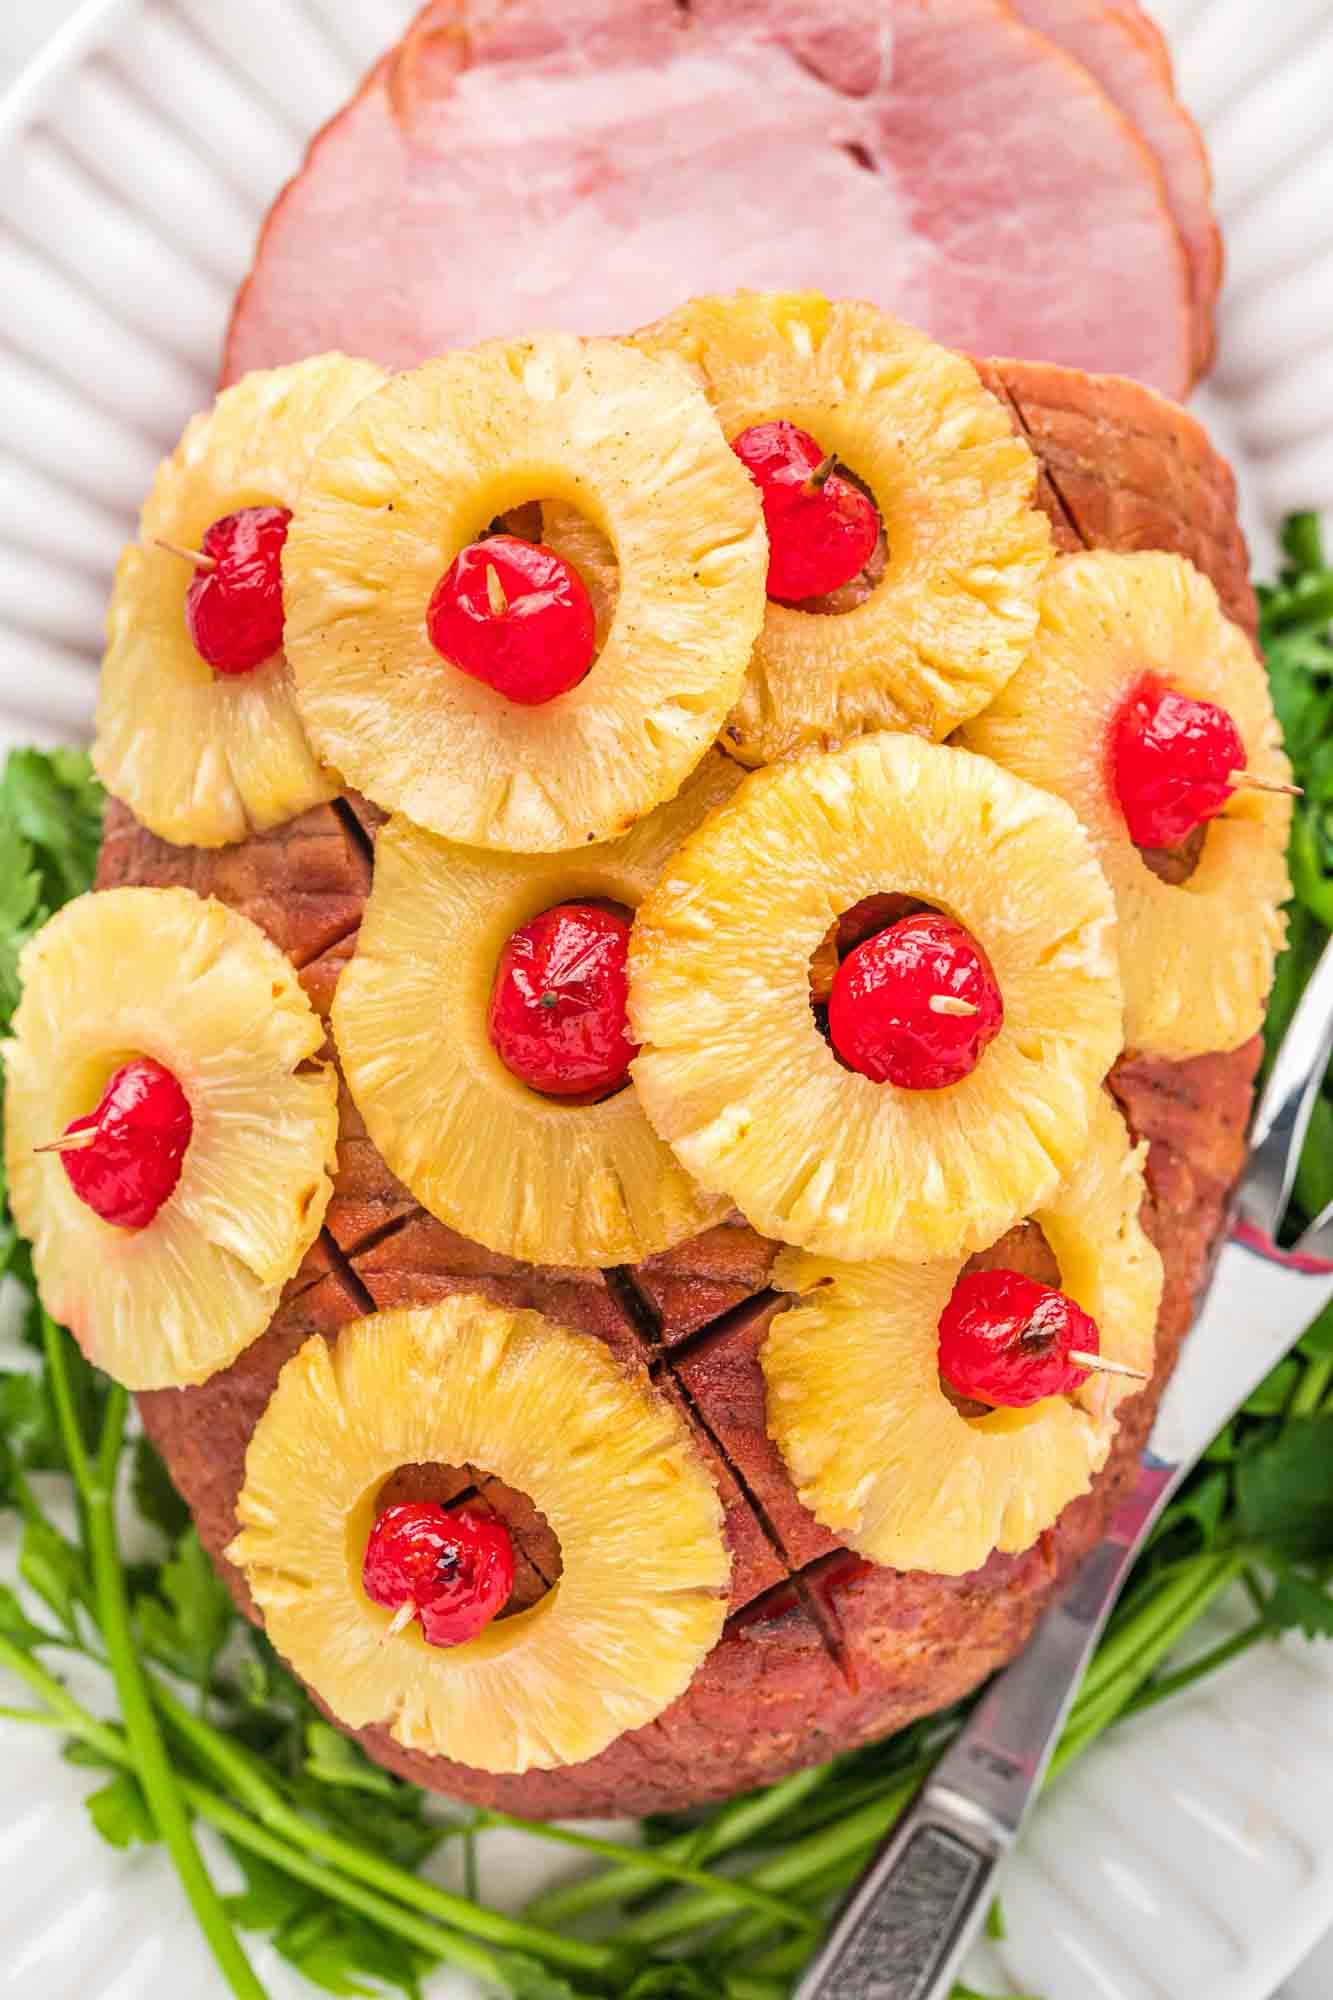 Overhead shot of pineapple ham with slices of pineapple and cherries